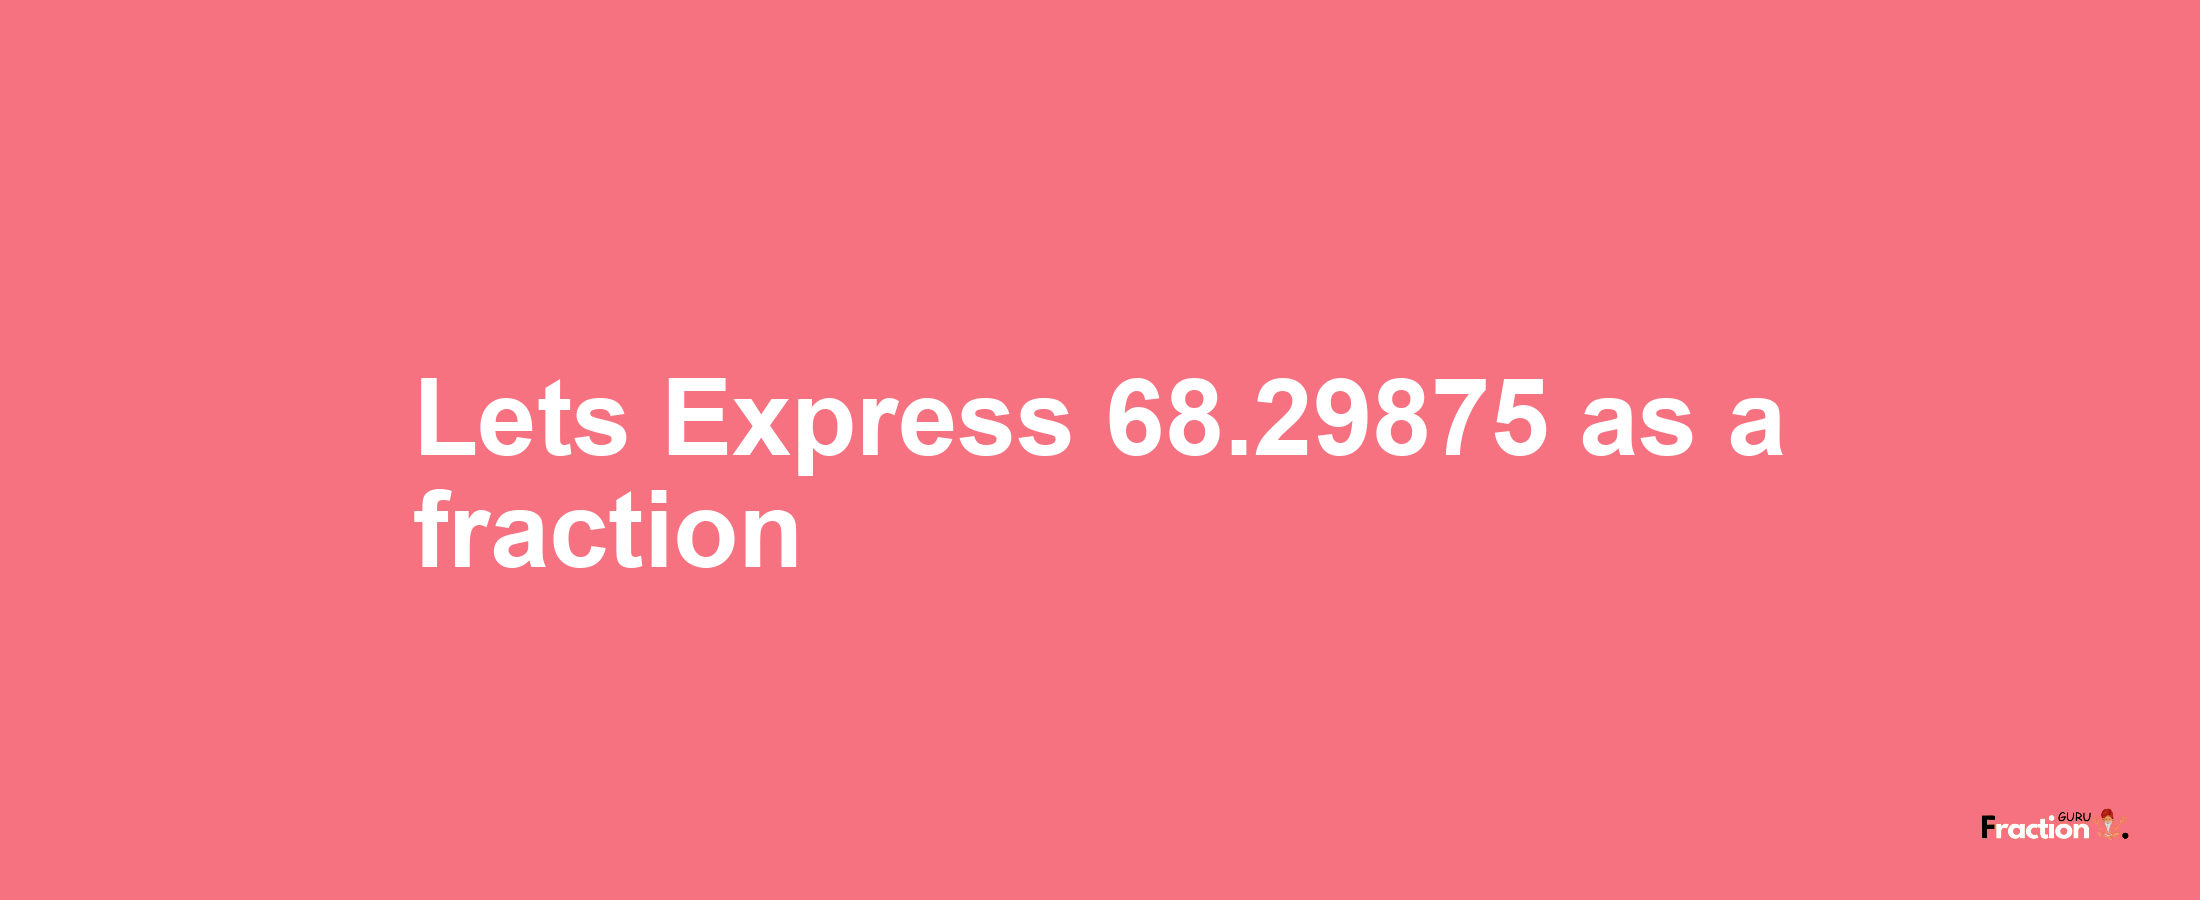 Lets Express 68.29875 as afraction